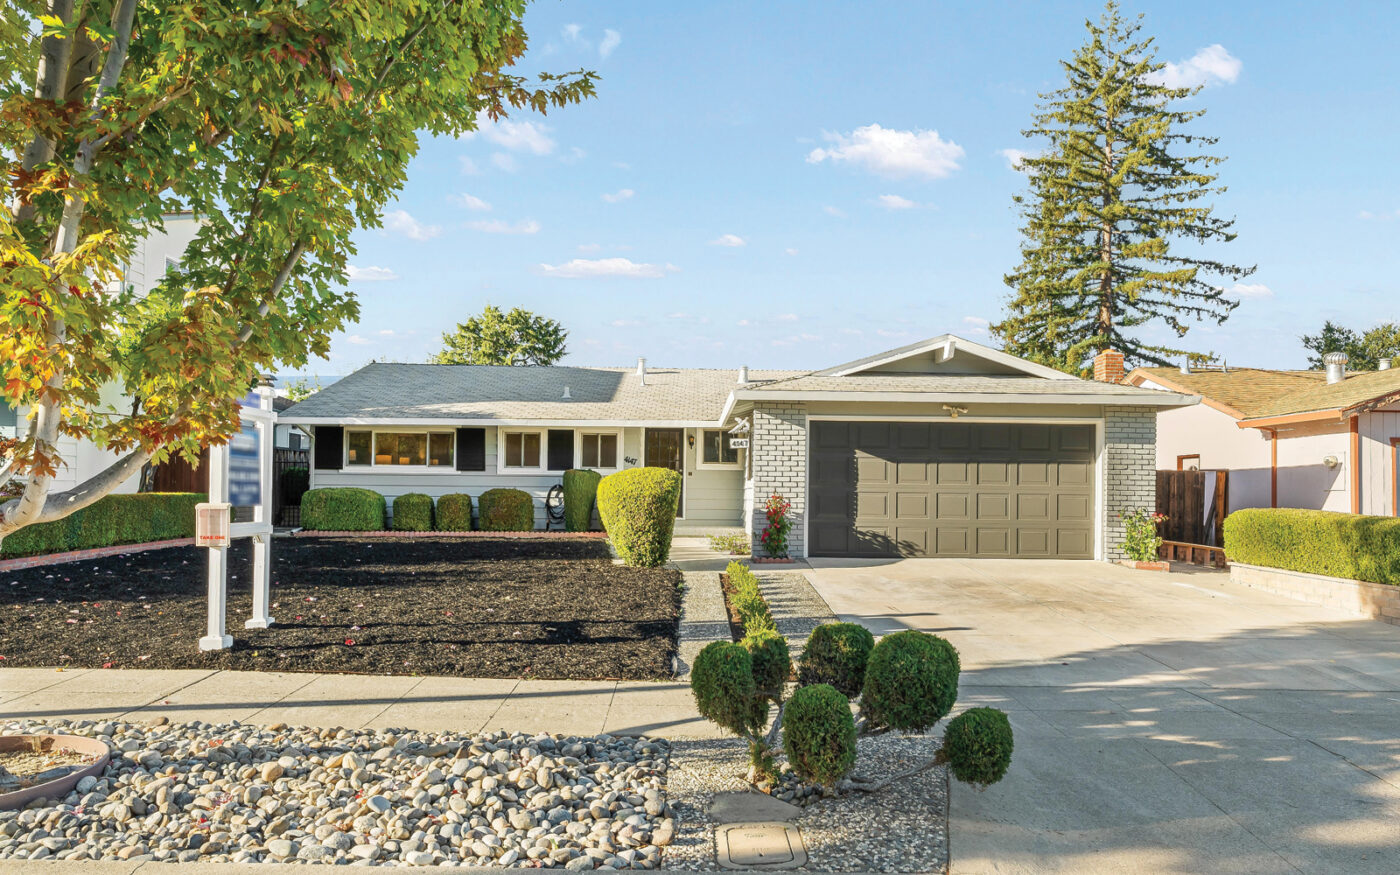 Even modest ranchers like this one in West San Jose are getting over 20 offers.